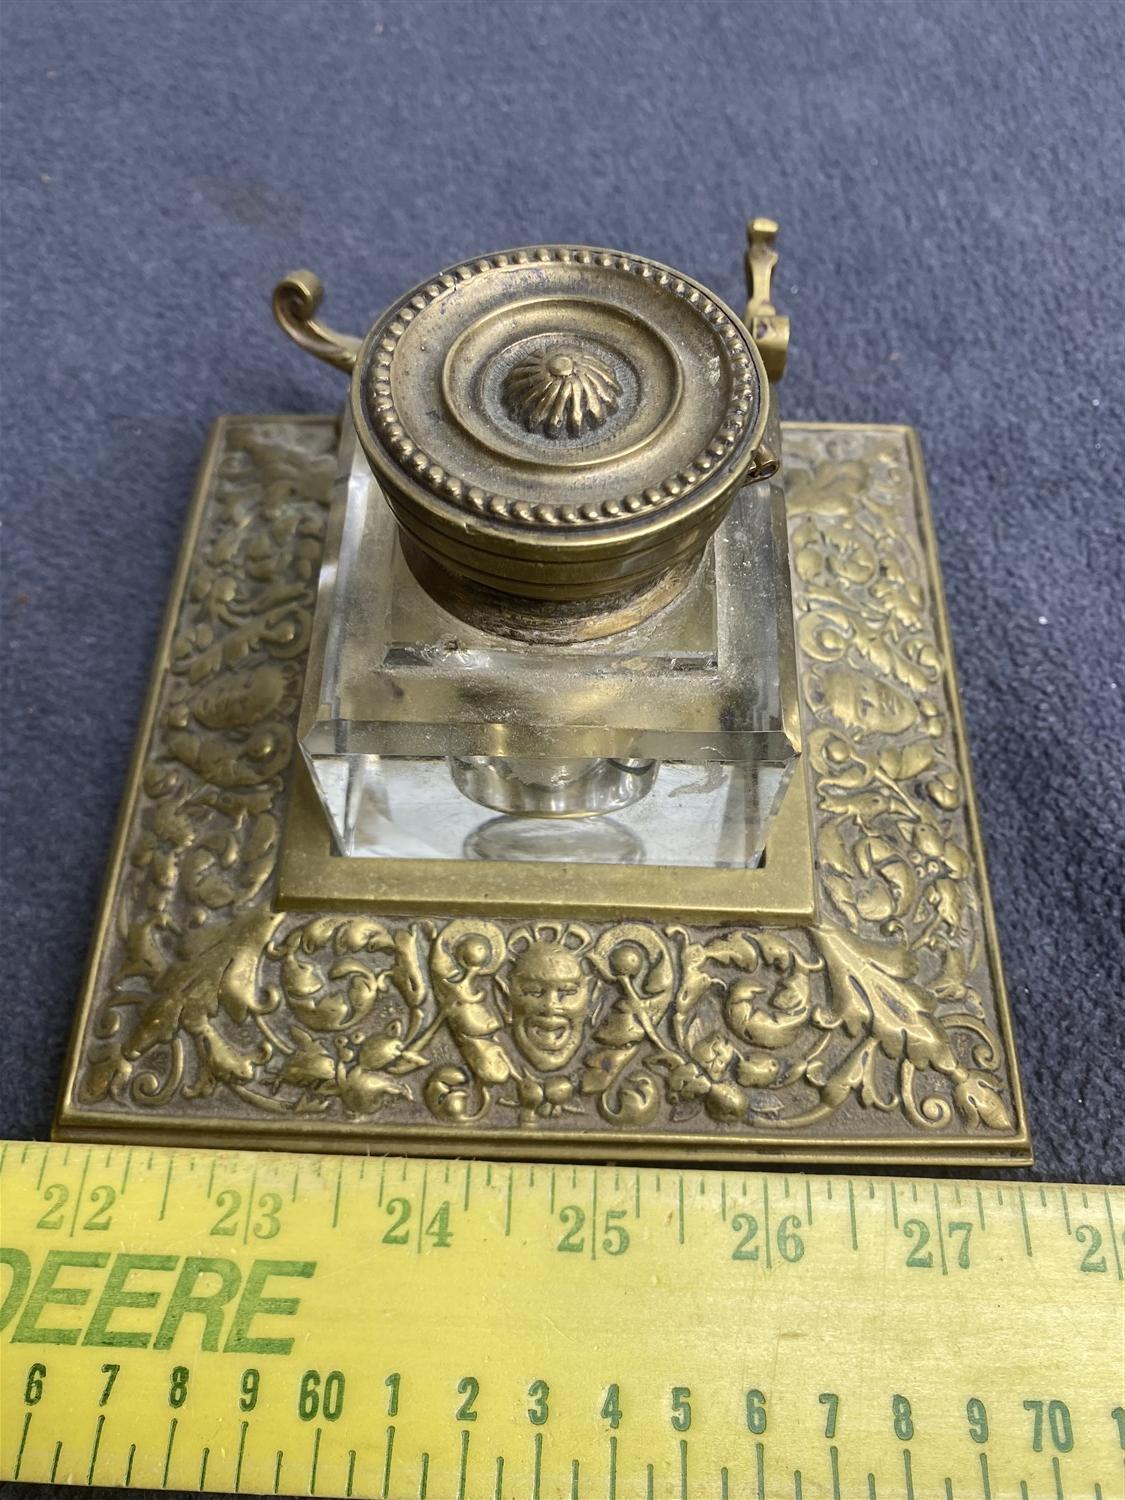 Nice Antique Brass Inkwell w/face and foliate design